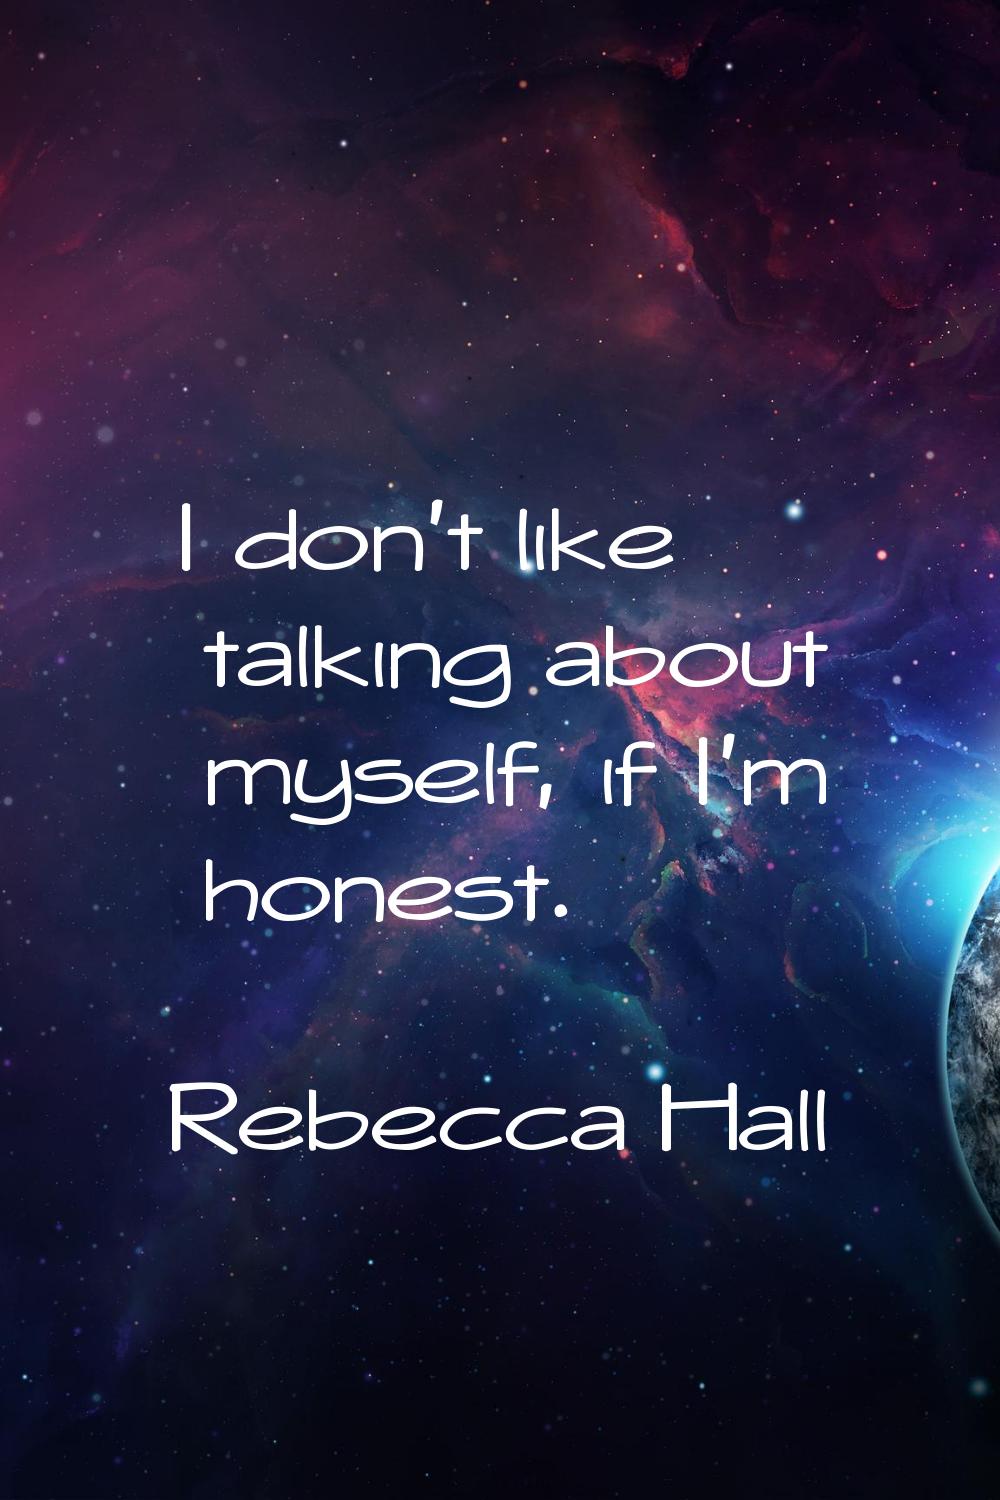 I don't like talking about myself, if I'm honest.